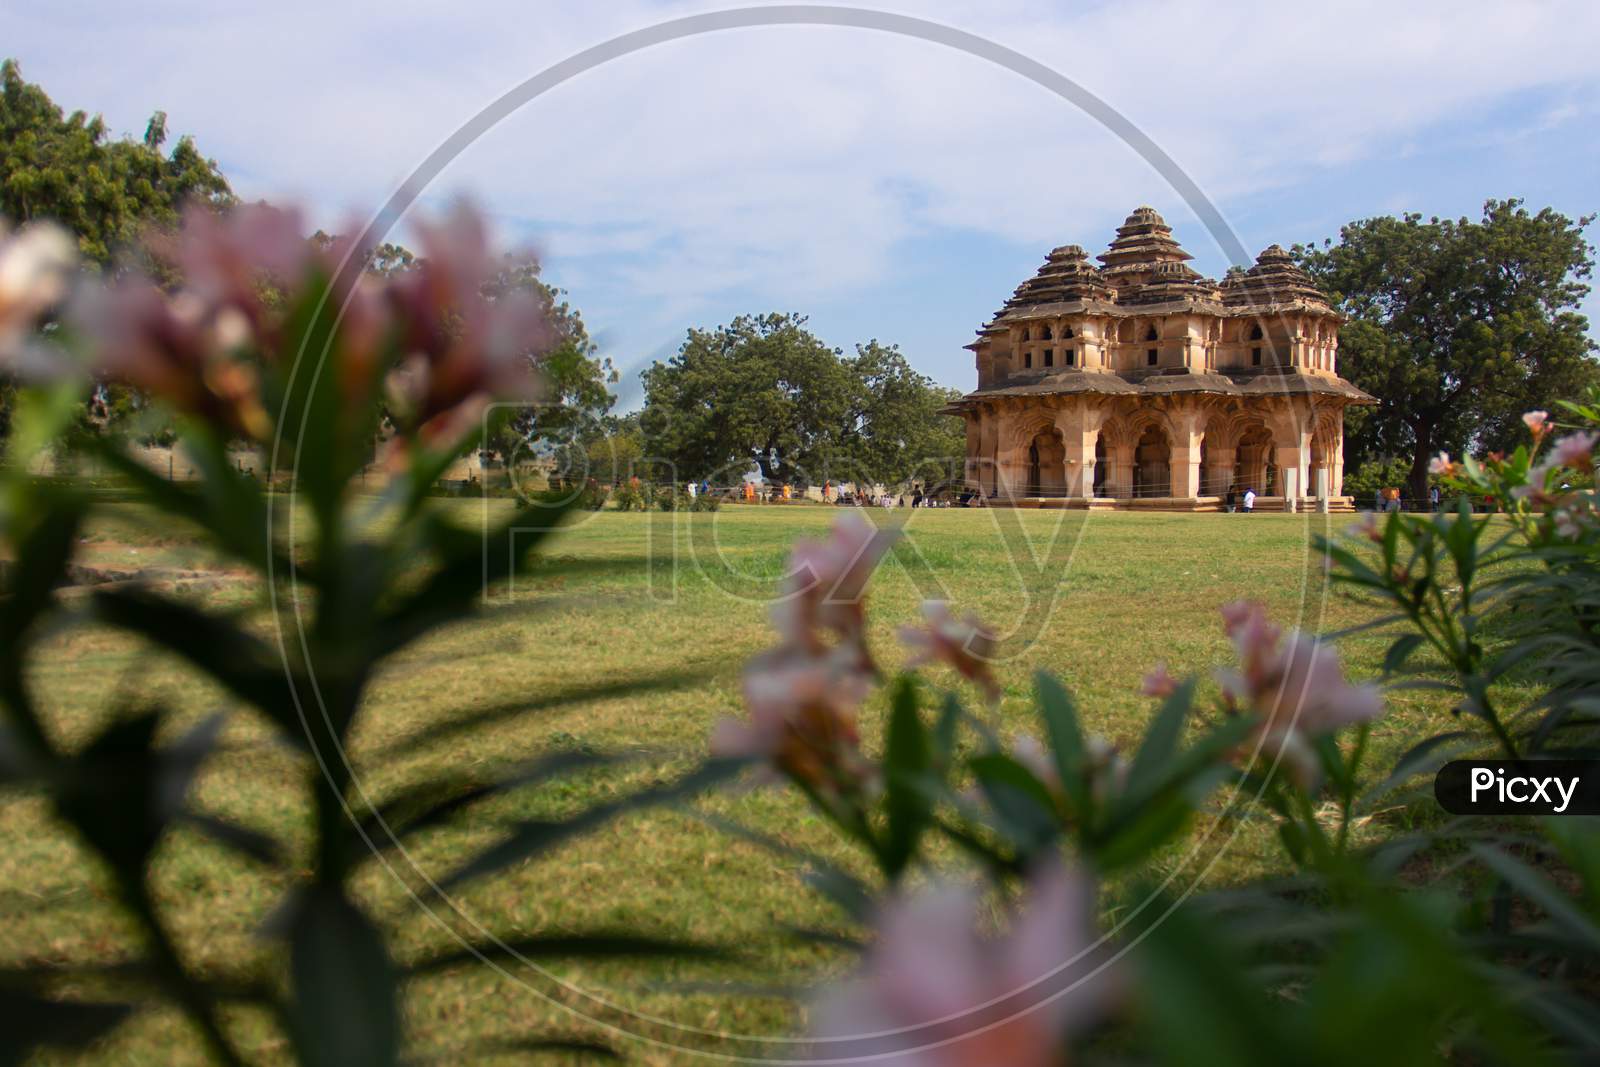 View of Lotus Mahal from the garden